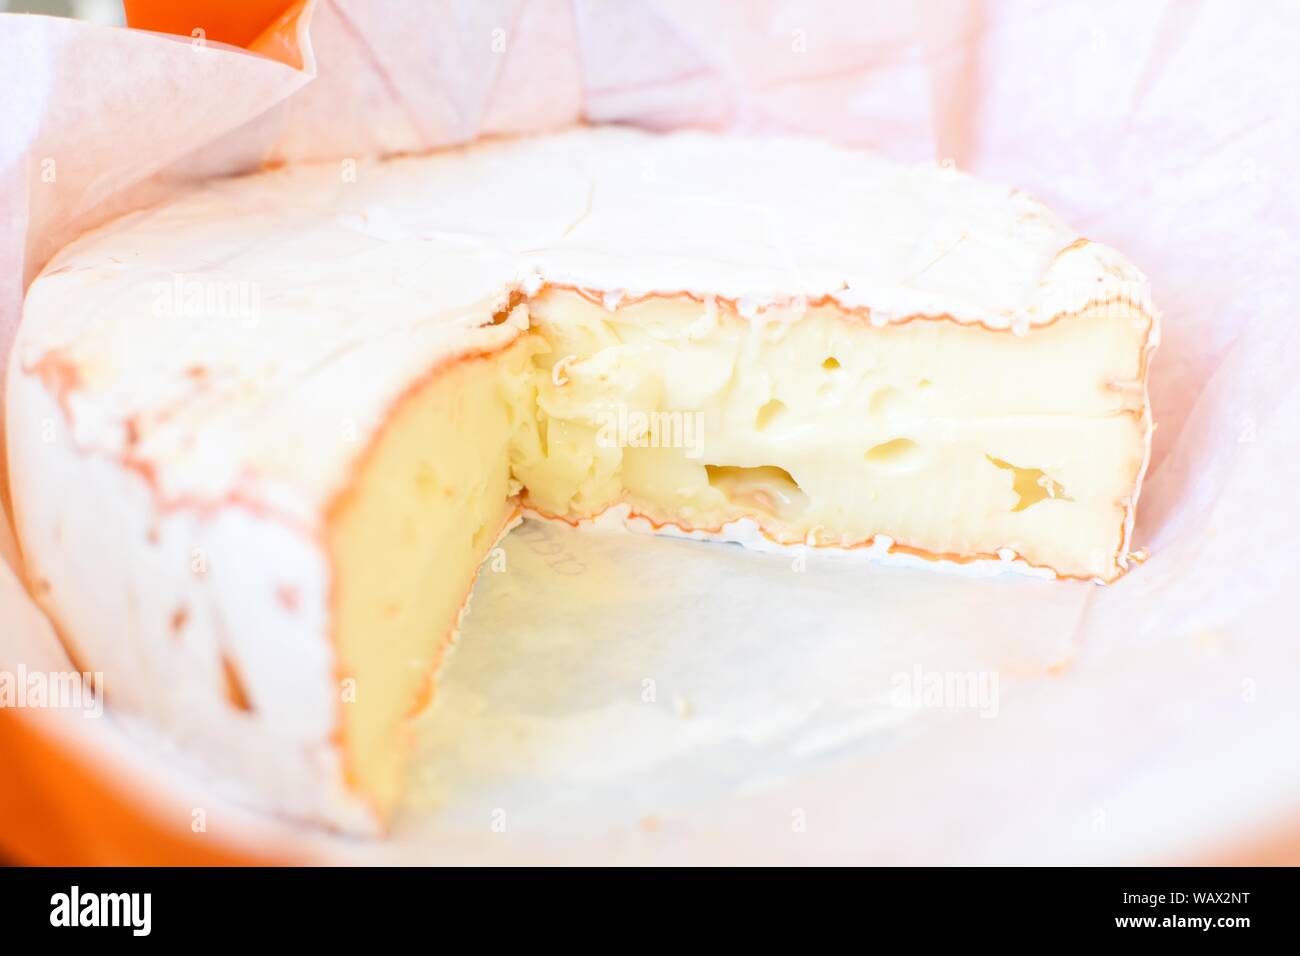 Close up of a Camembert cheese in the open original paper package. Stock Photo